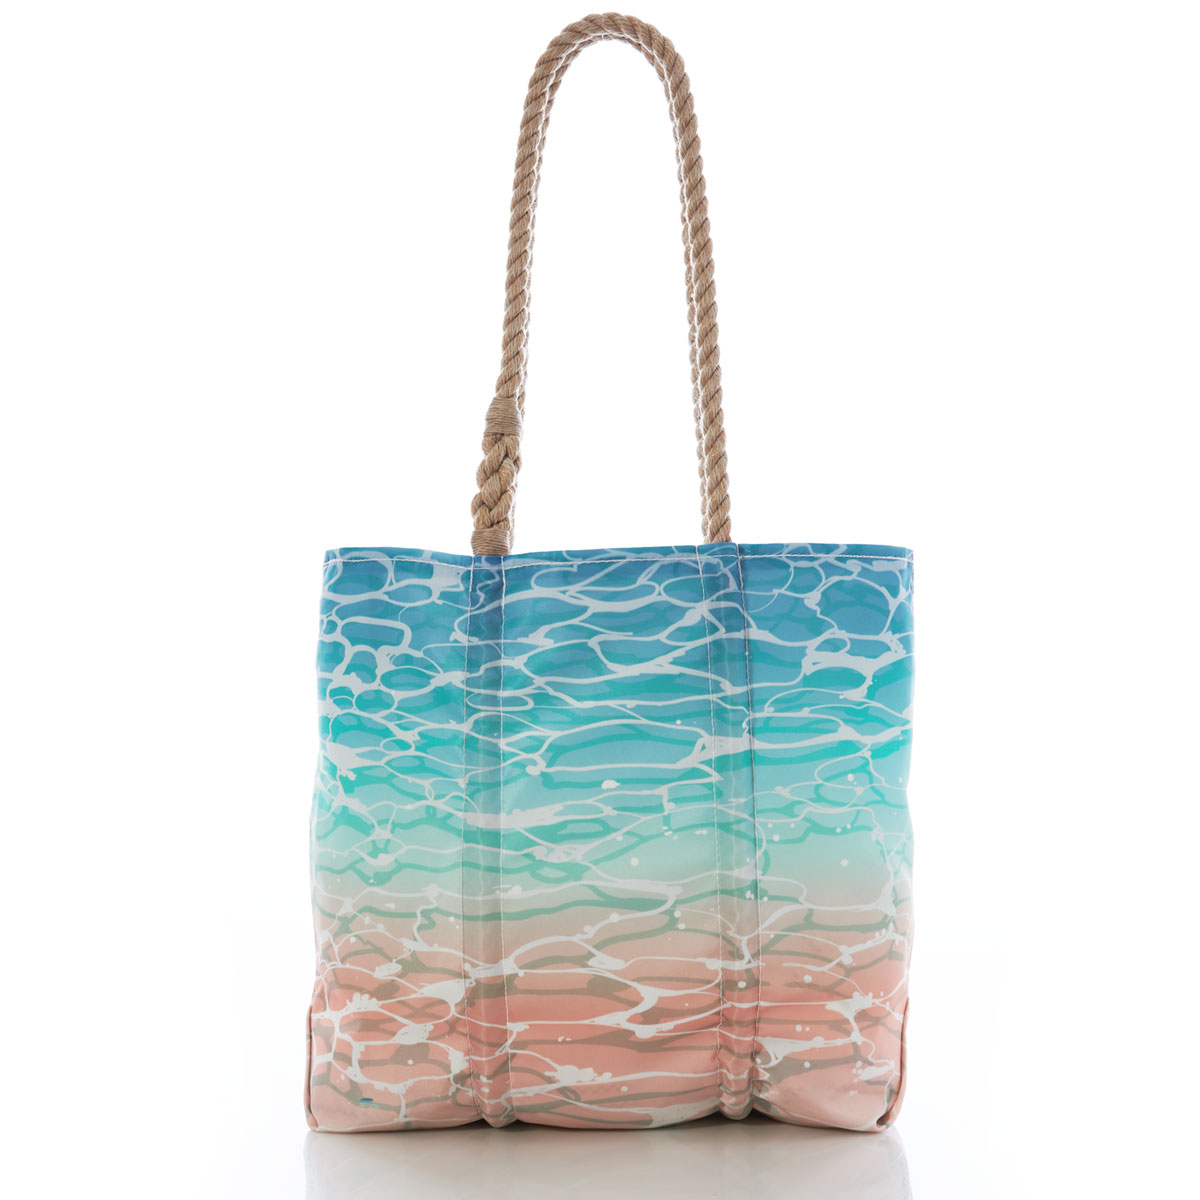 Dreaming of vacation & summertime, with the Summer Simple Tote